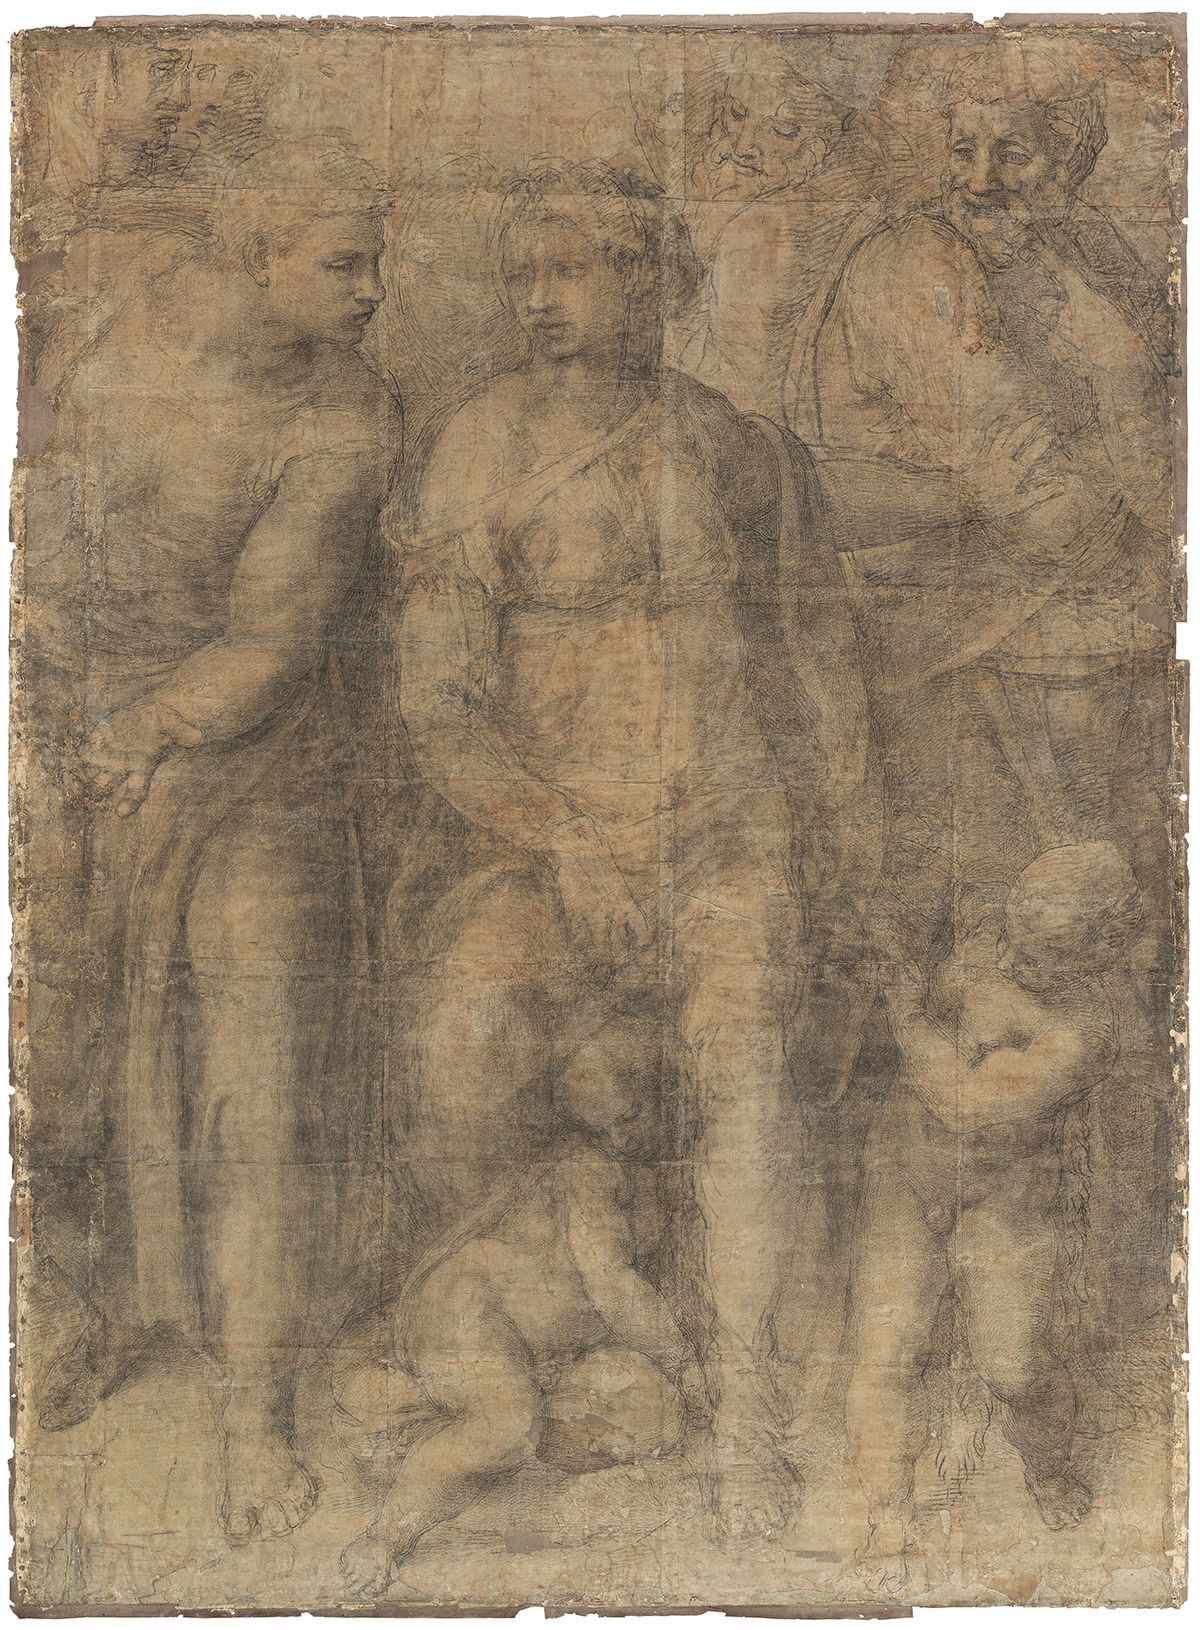 Michelangelo Buonarroti, cartoon for Epifania, chalk on paper, about 1550-53.© The Trustees of the British Museum